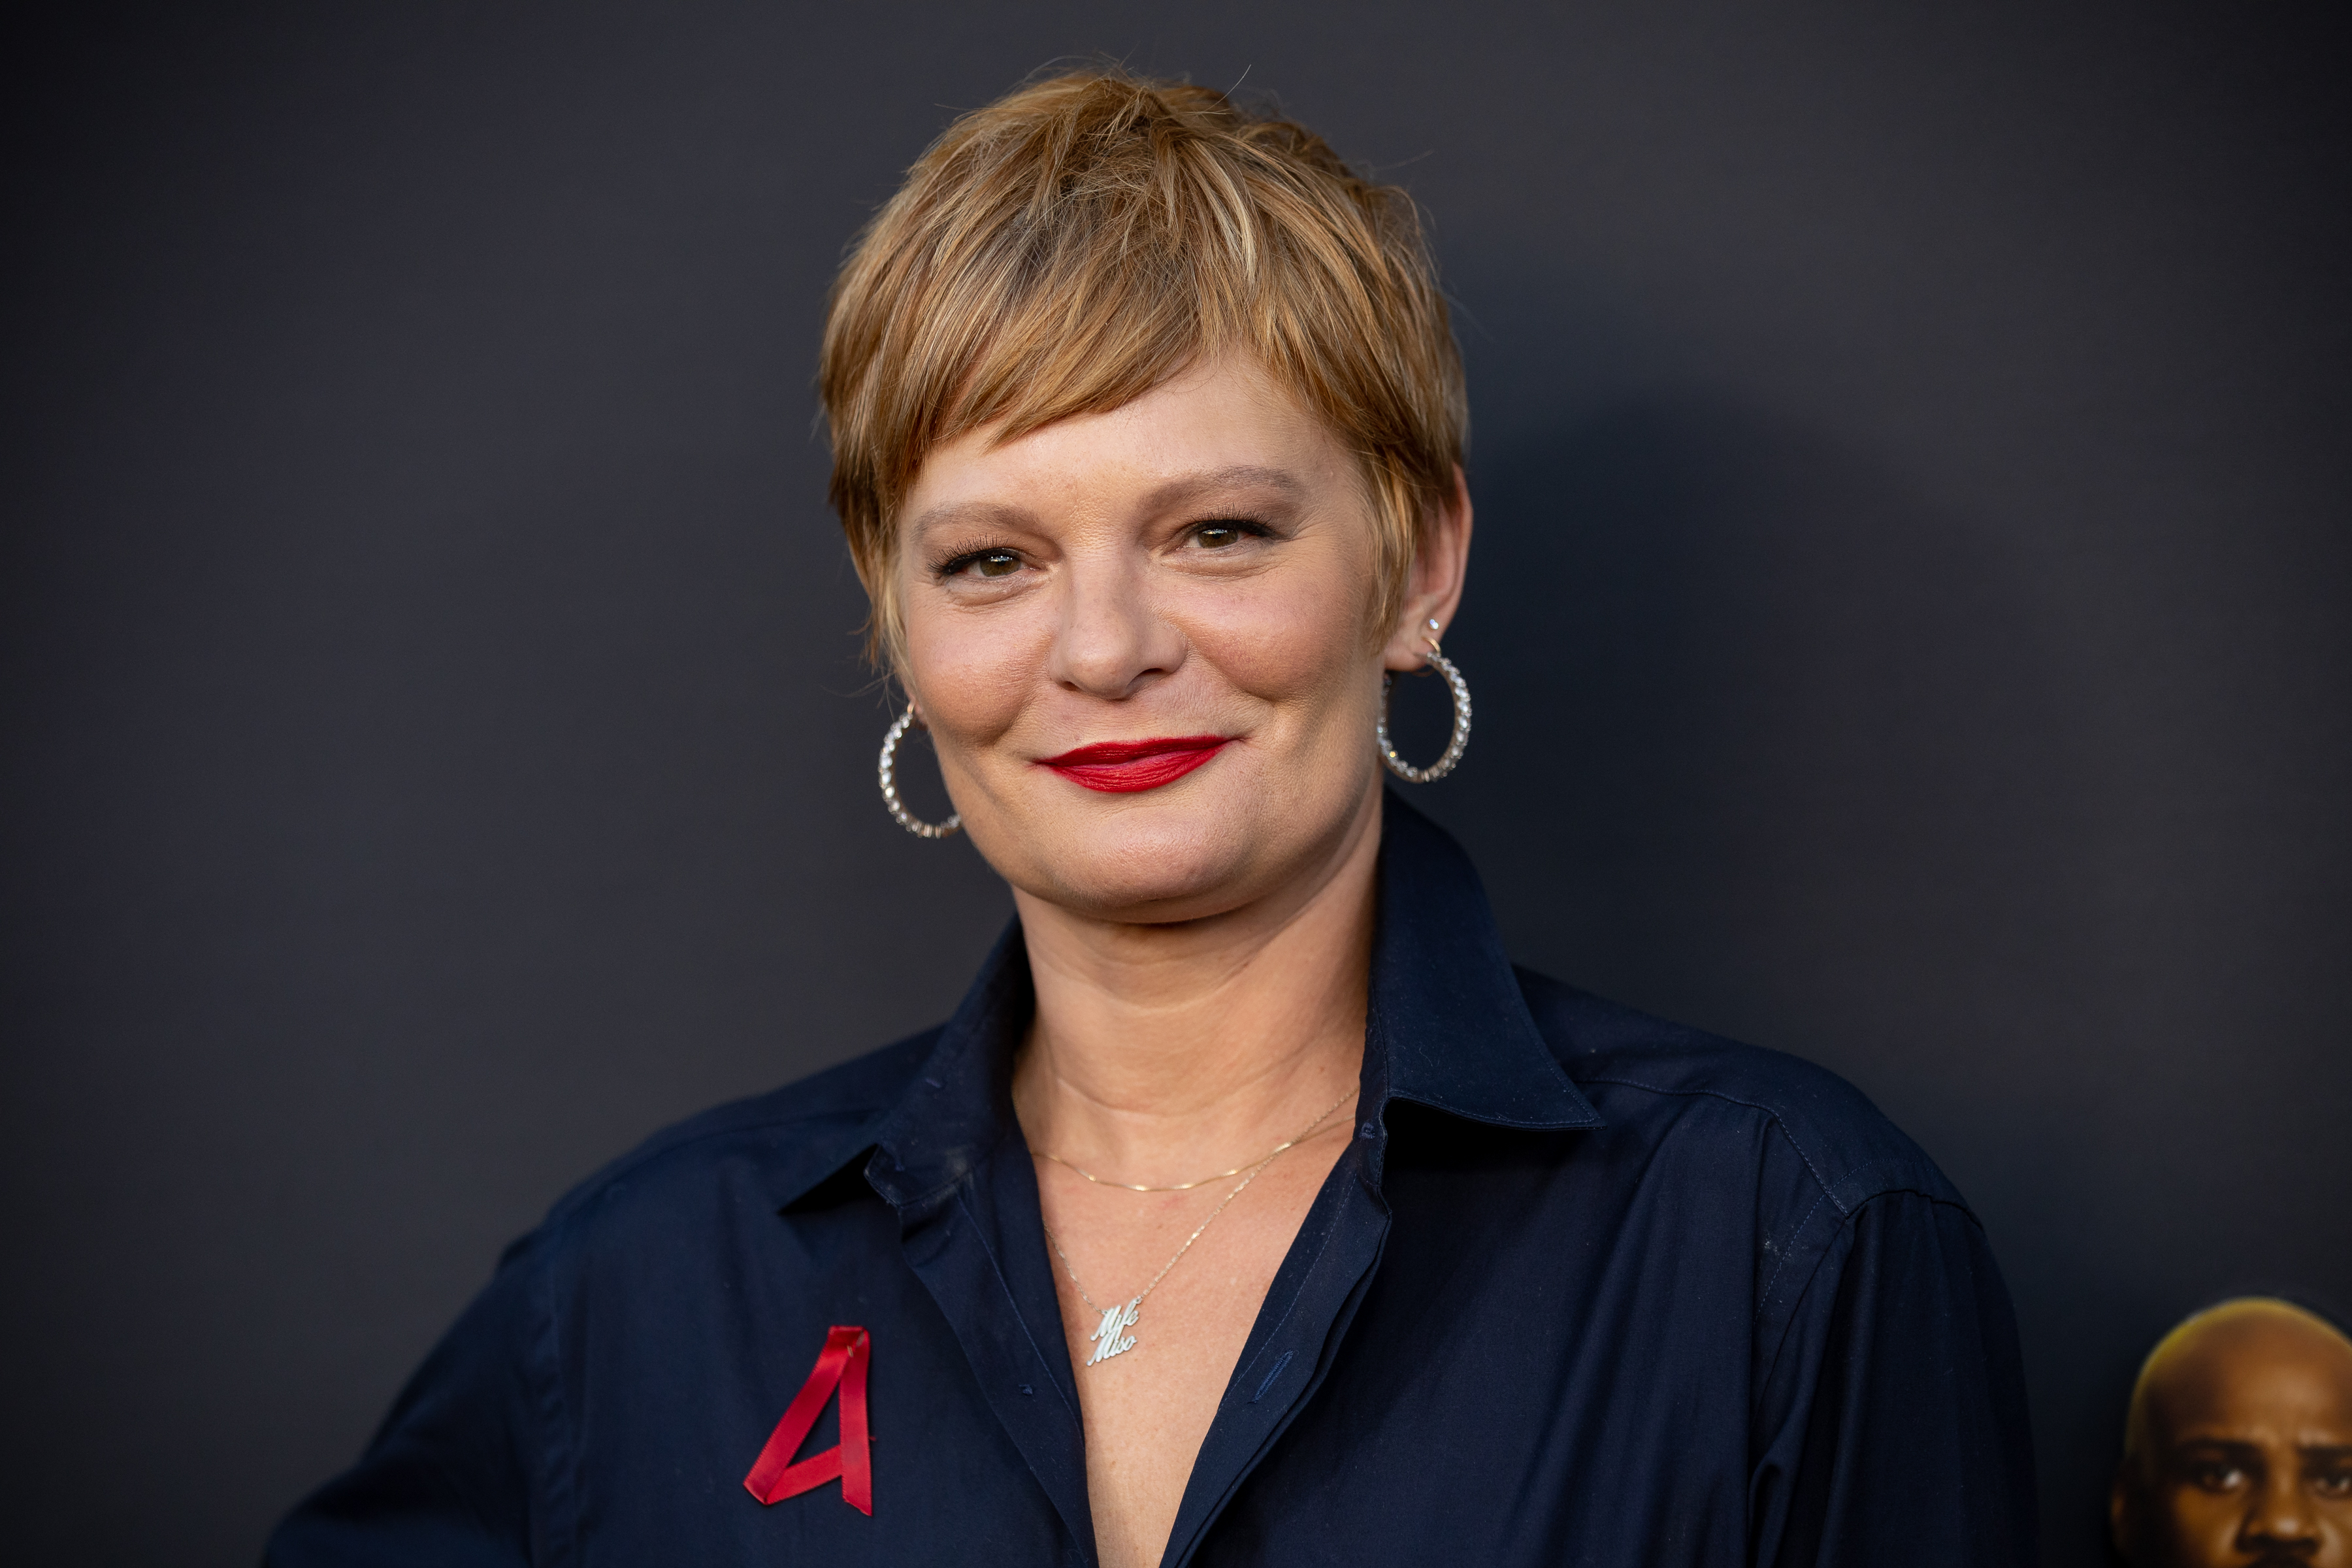 Martha Plimpton at the premiere of Freevee's "Sprung" on August 14, 2022, in Hollywood, California. | Source: Getty Images